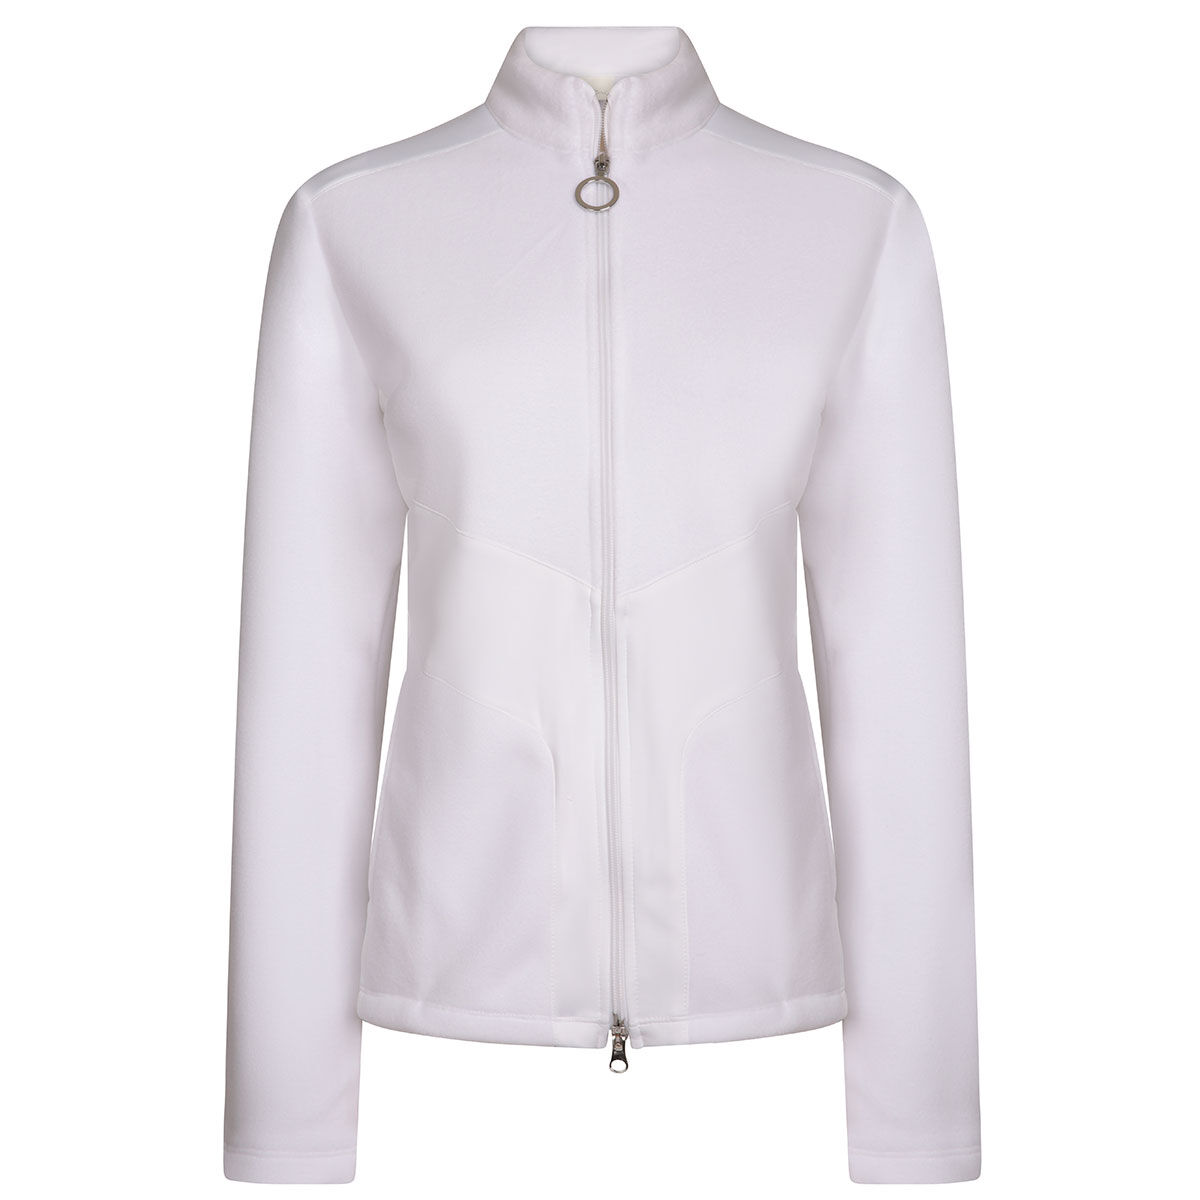 Greg Norman White Bonded Fleece Golf Jacket, Womens | American Golf, Size: XS - Father's Day Gift von Greg Norman